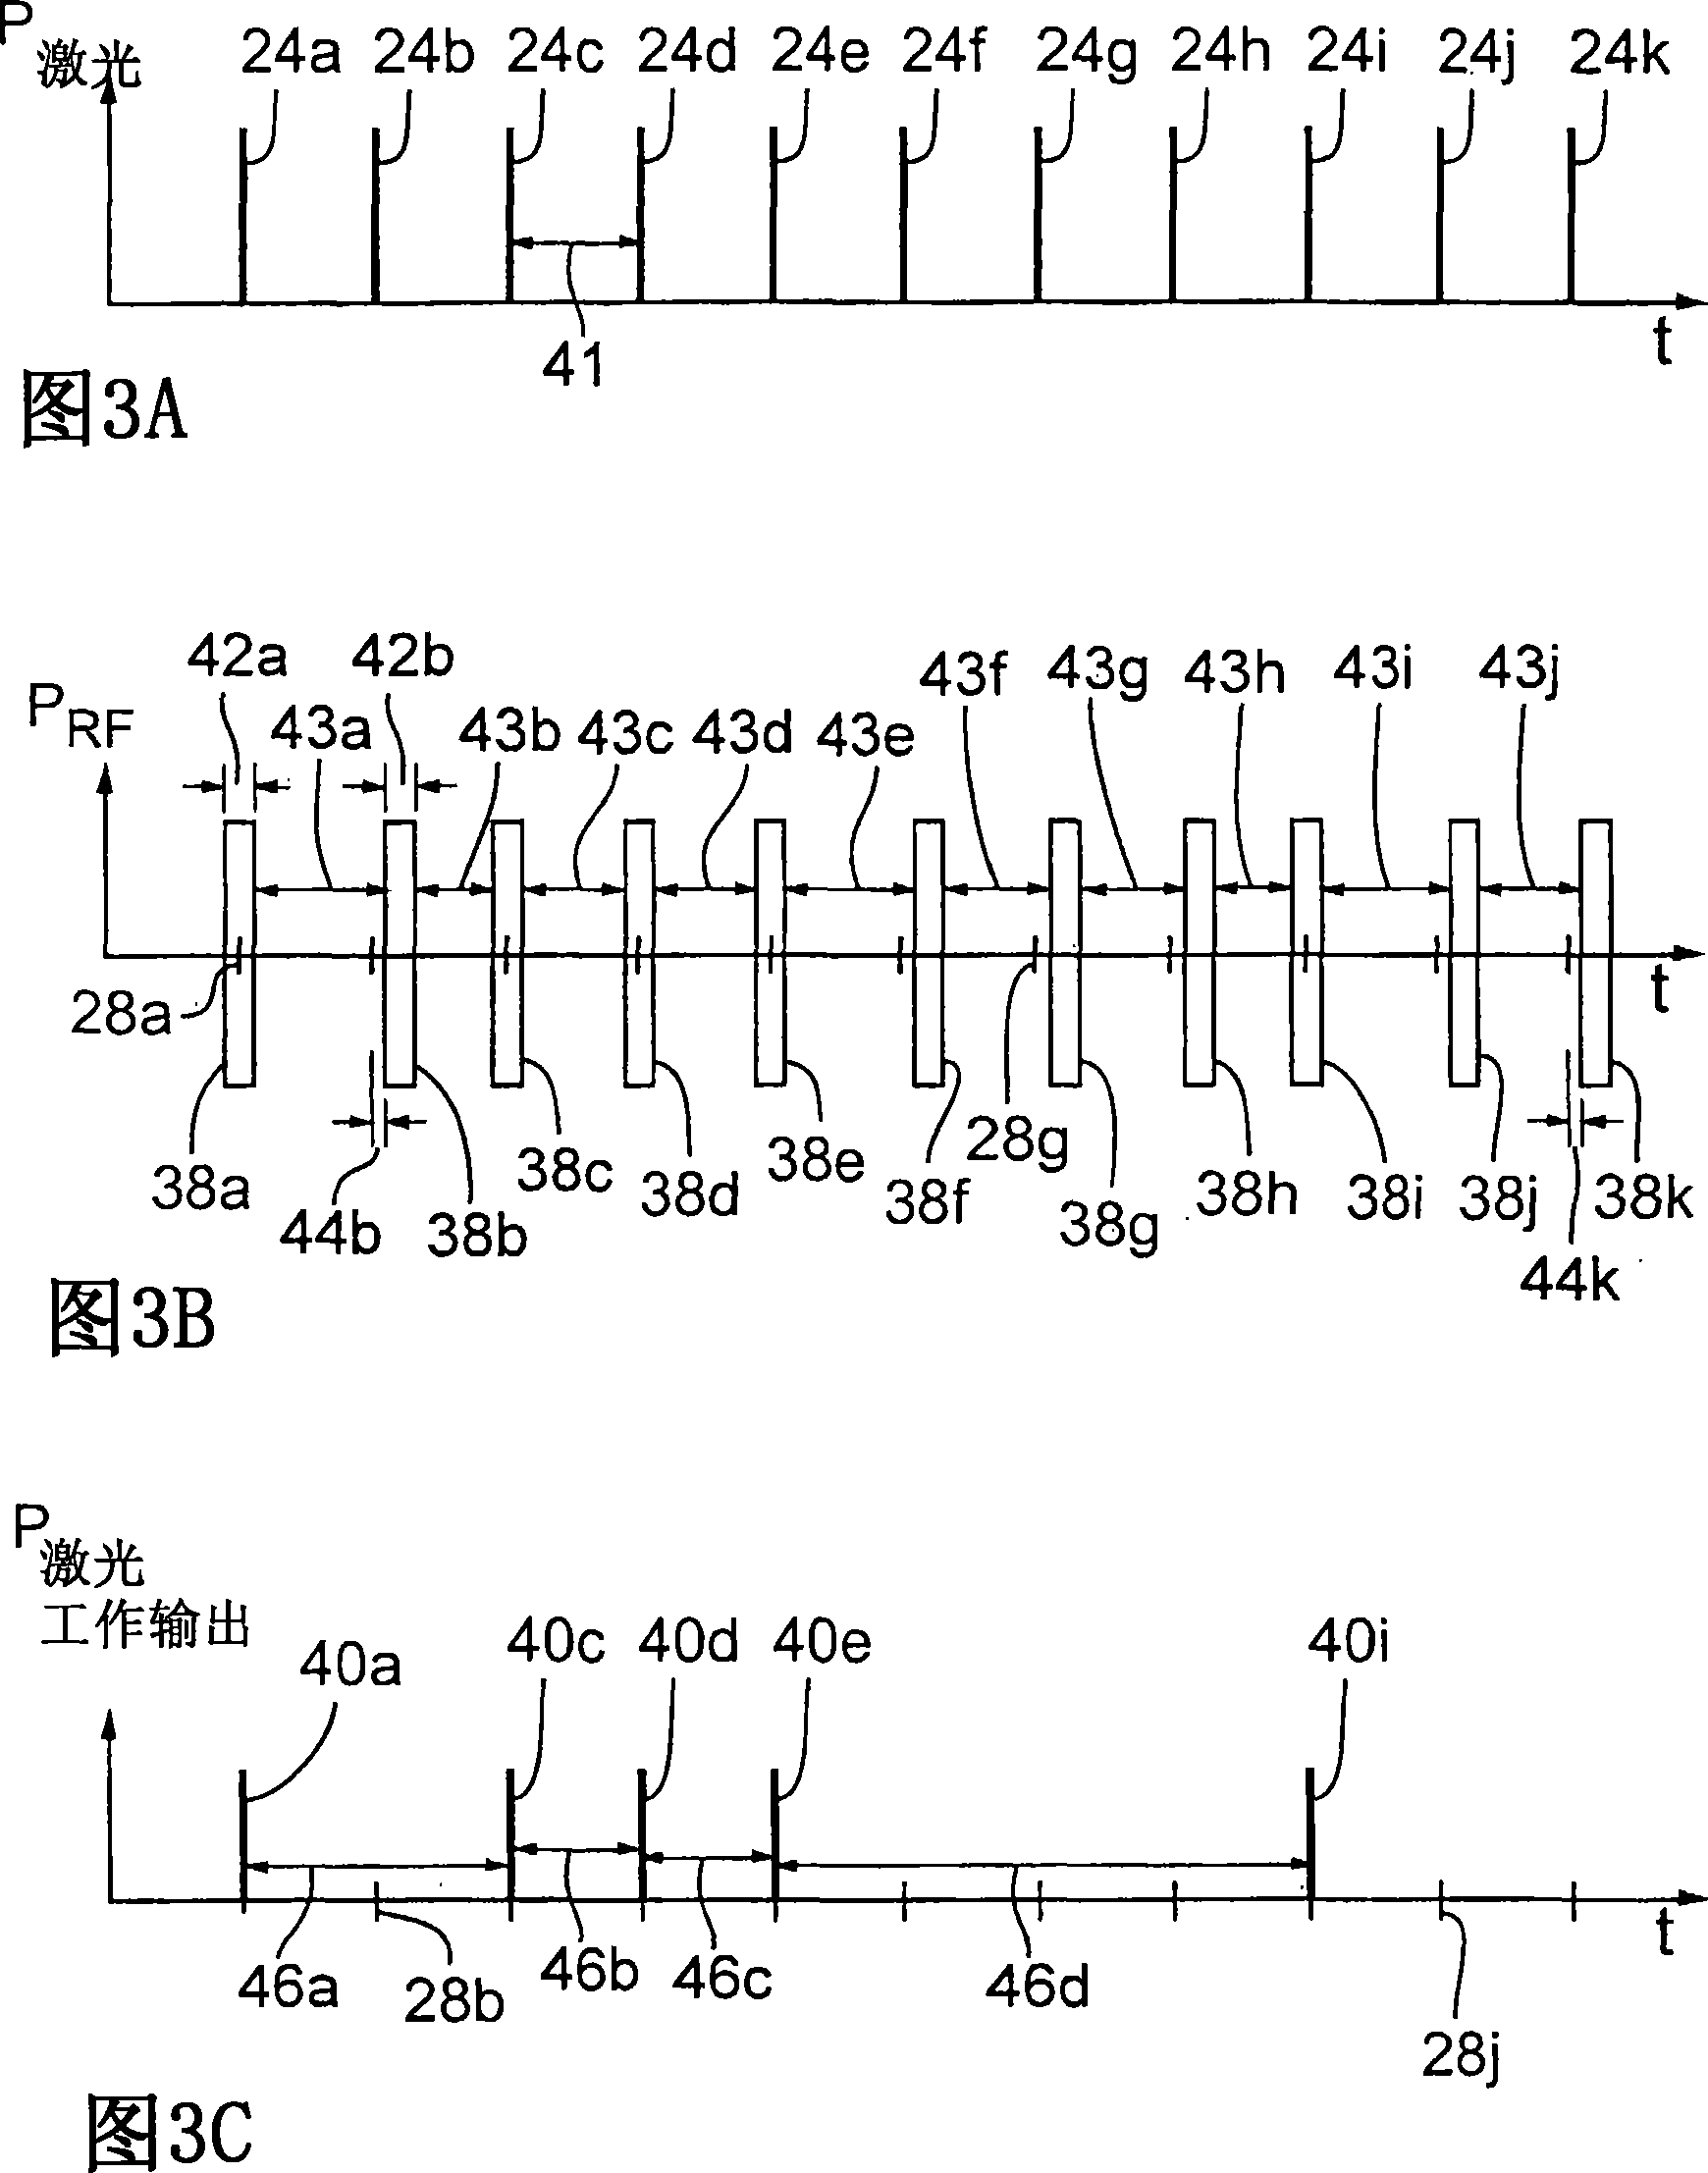 Efficient micro-machining apparatus and method employing multiple laser beams